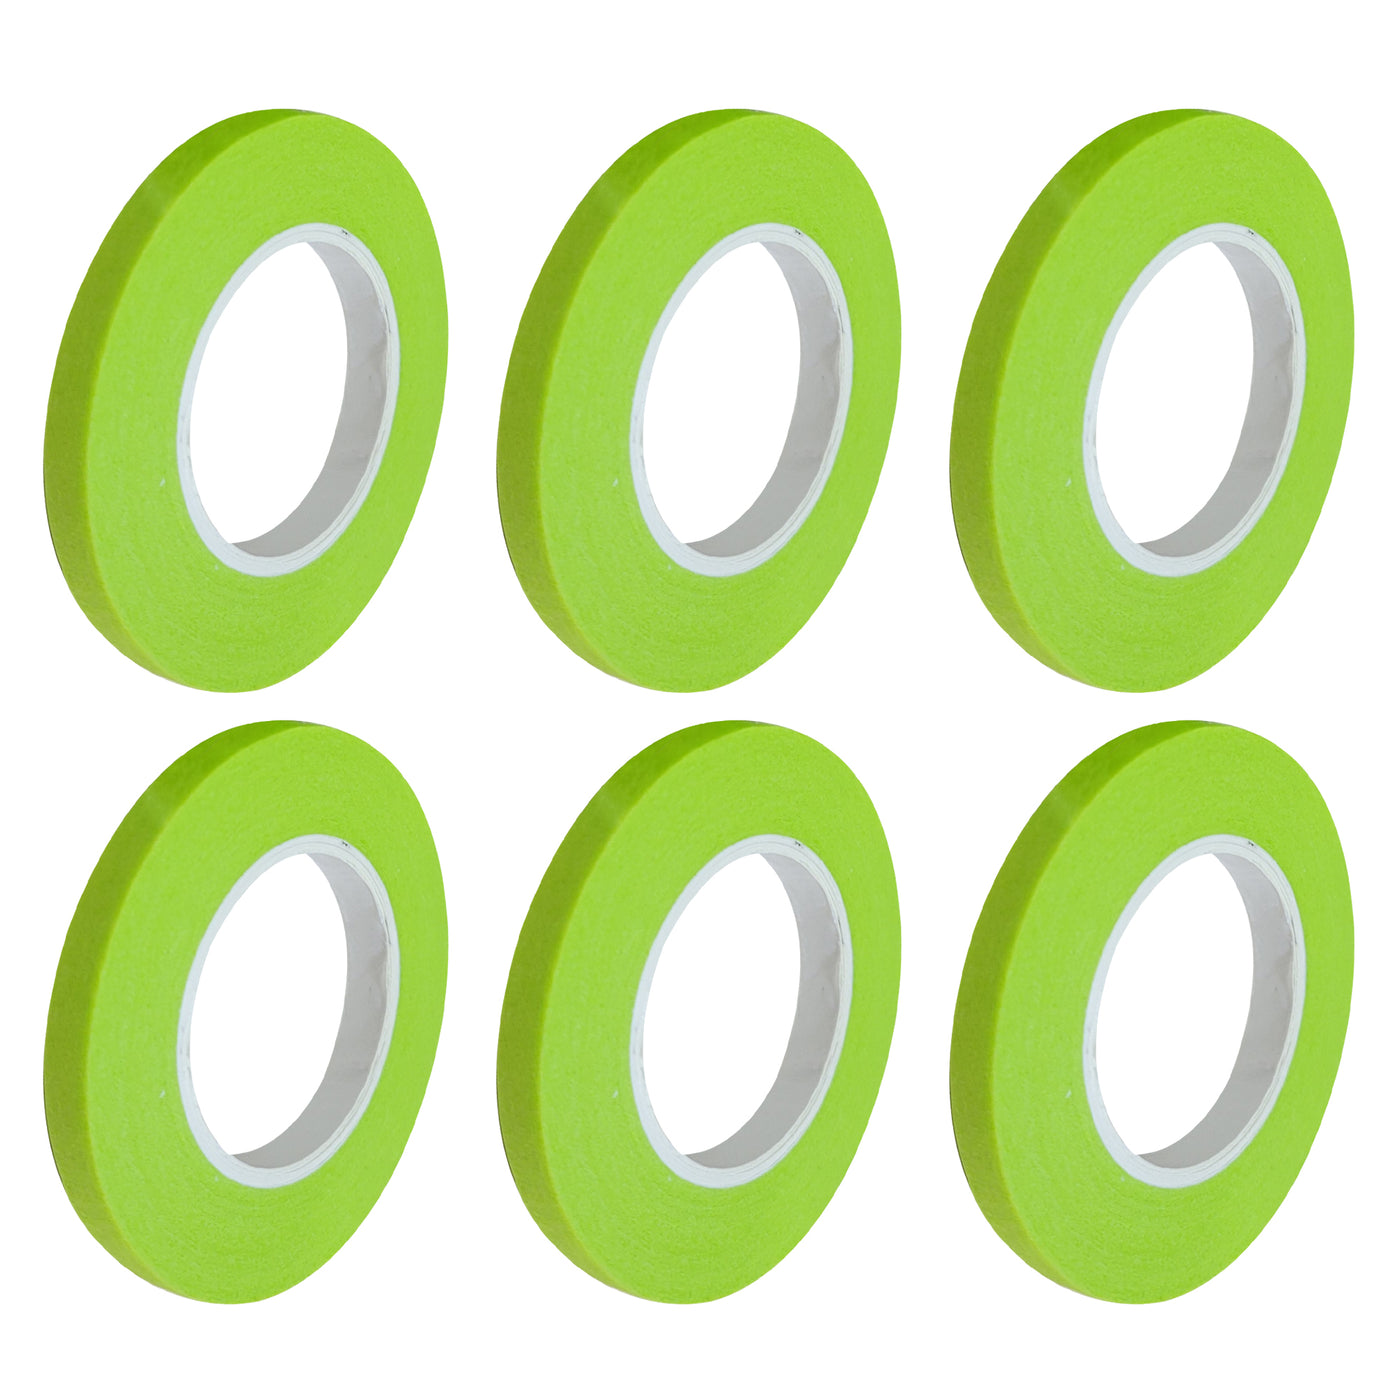 Uxcell Uxcell 6Pcs 20mm 0.8 inch Wide 20m 21 Yards Masking Tape Painter Tape Rolls Light Green